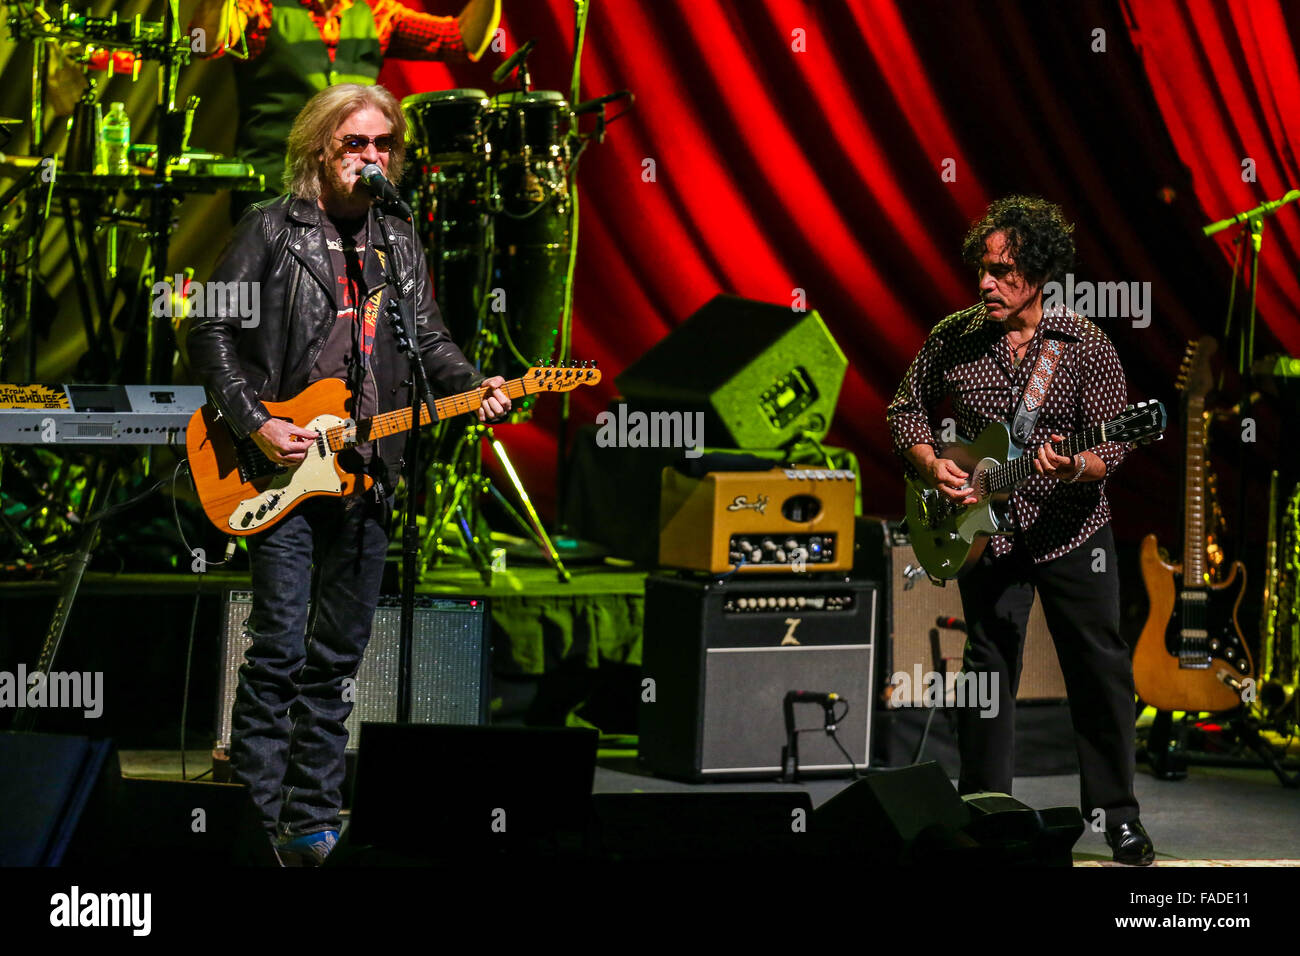 Daryl Hall and John Oates perform in Concert Stock Photo Alamy